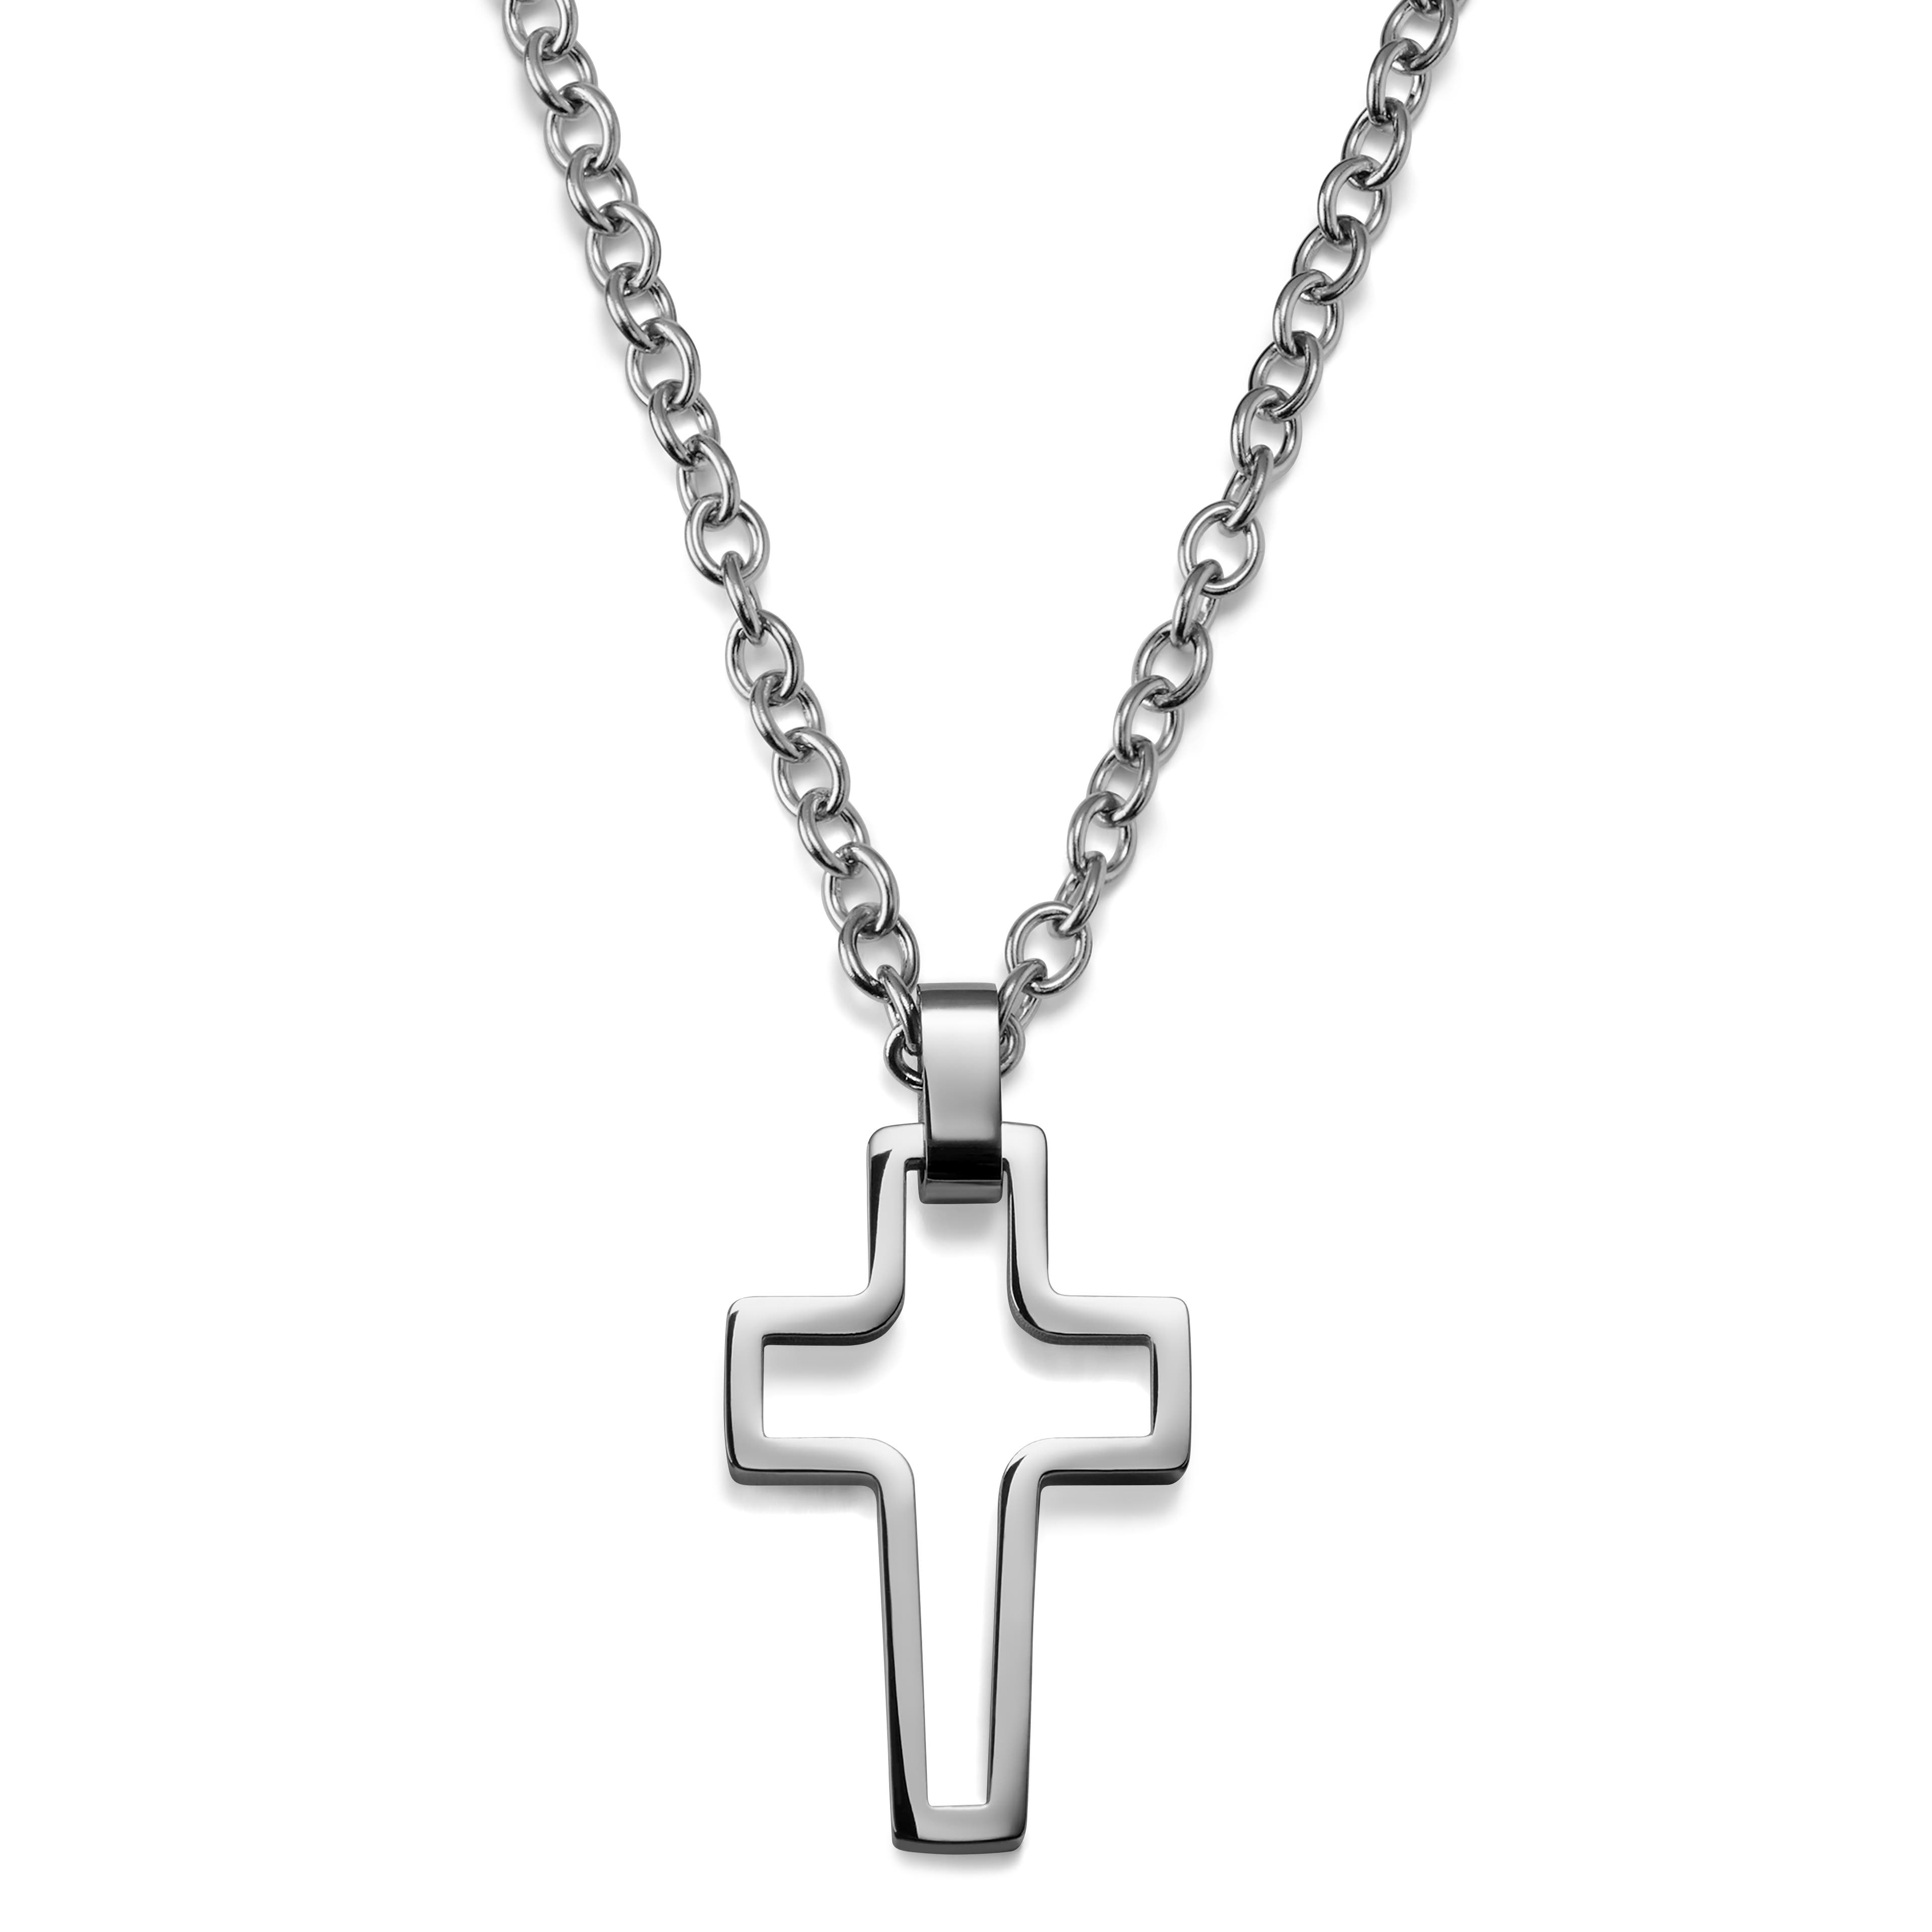 Silver-Tone Stainless Steel Hollow Cross Cable Chain Necklace